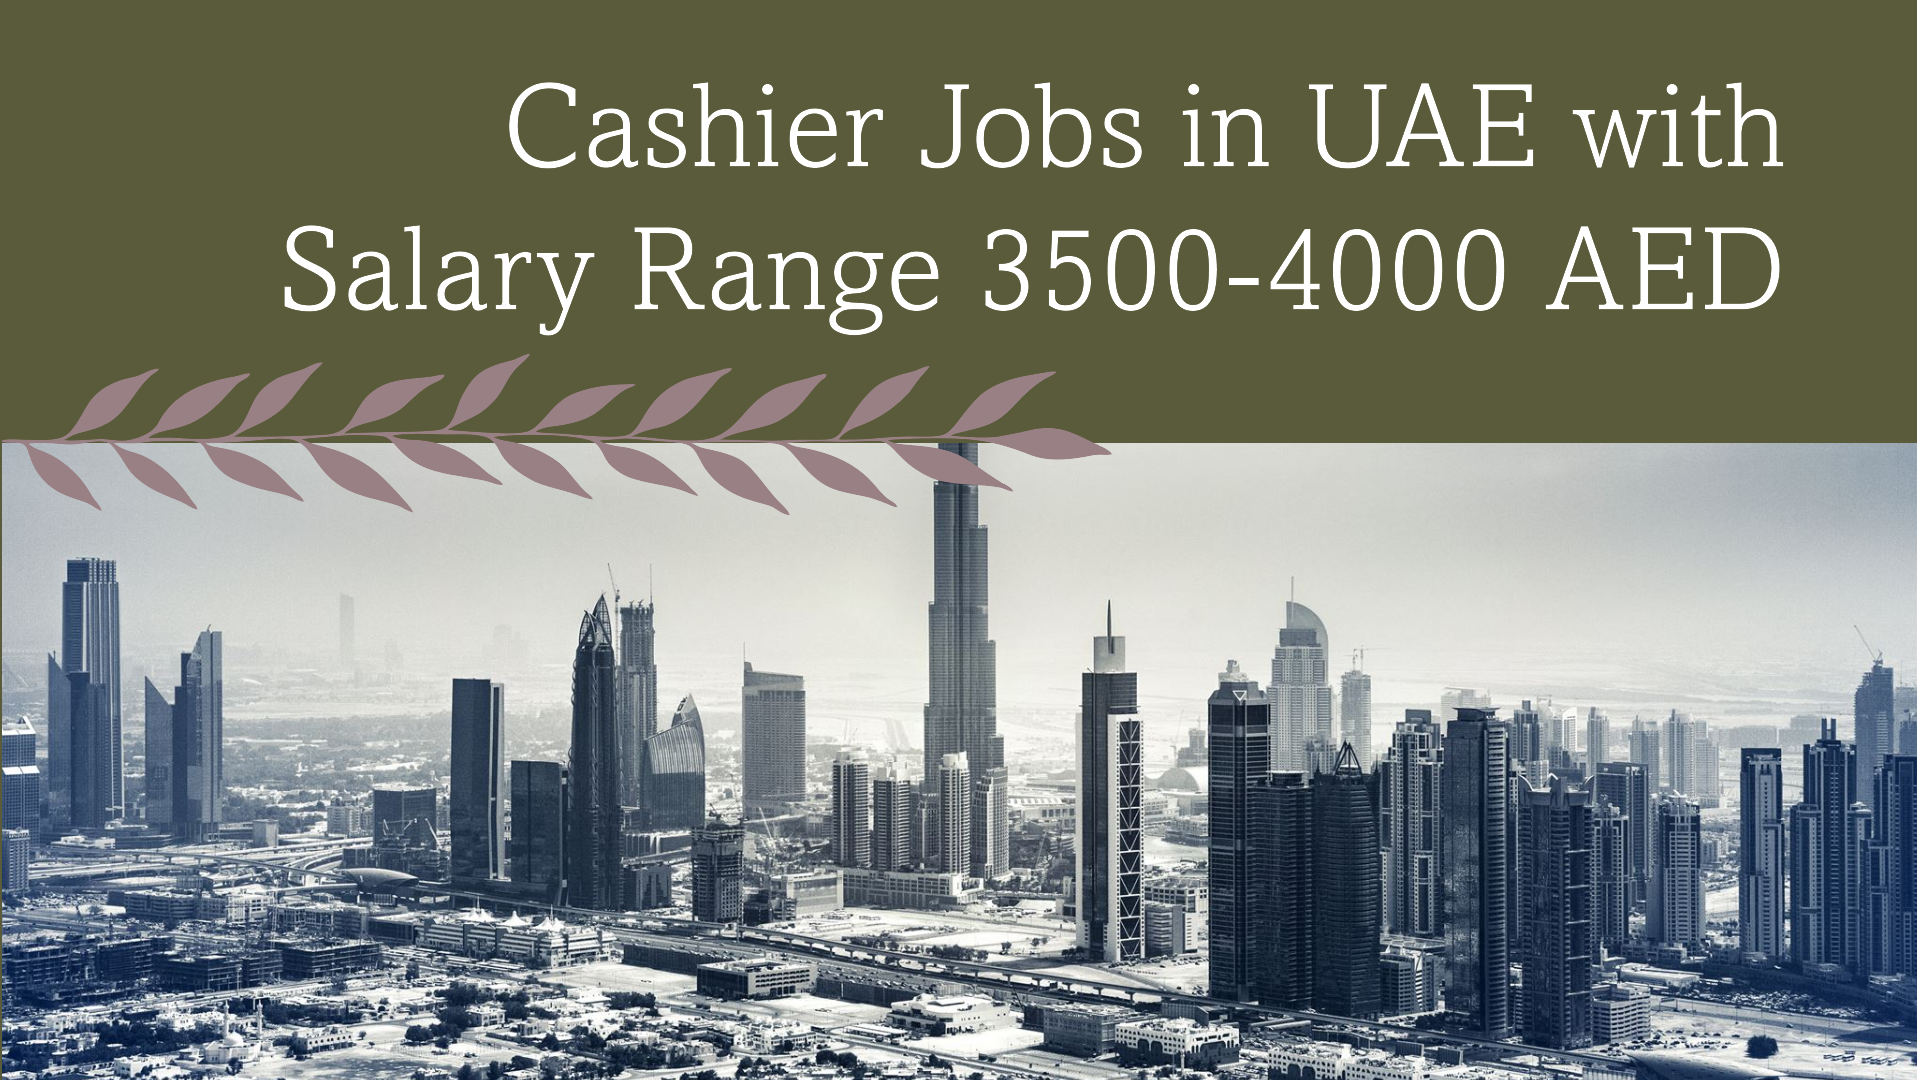 cashier jobs in uae with salary 3500-4000 AED